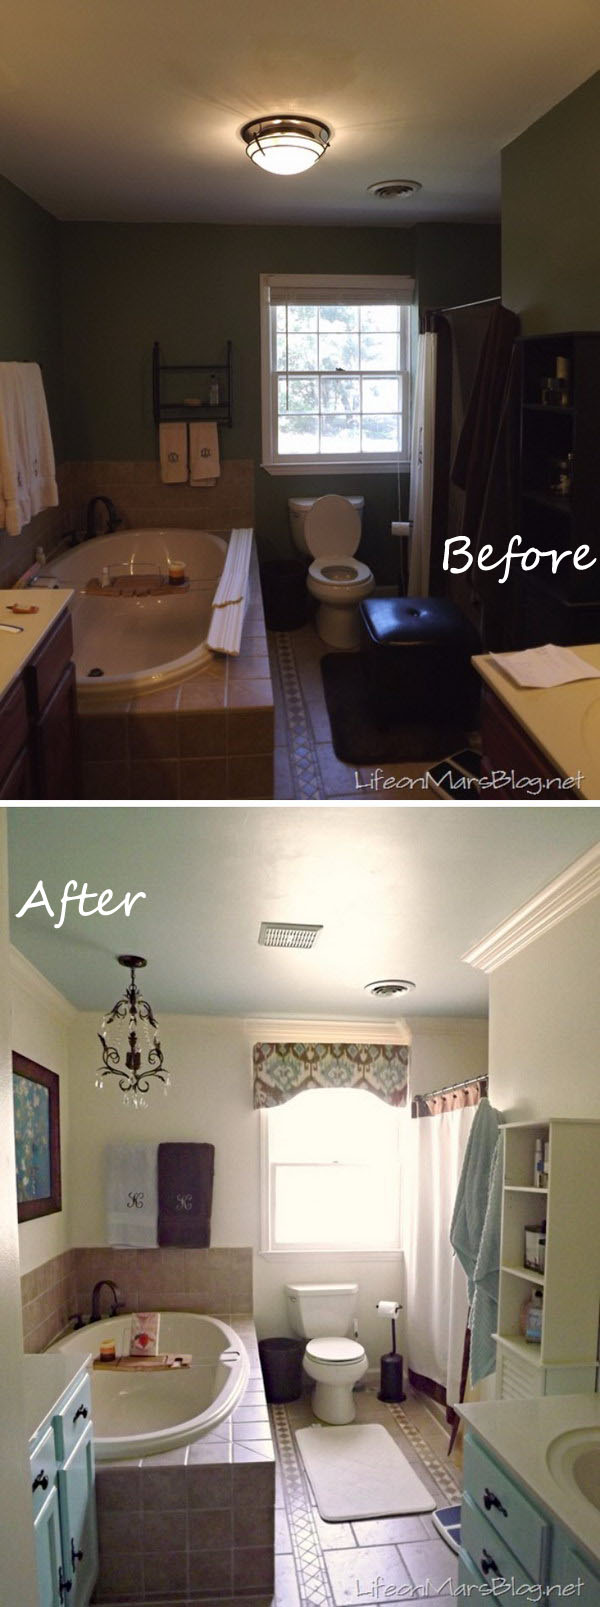 19-20-bathroom-remodel-before-and-after